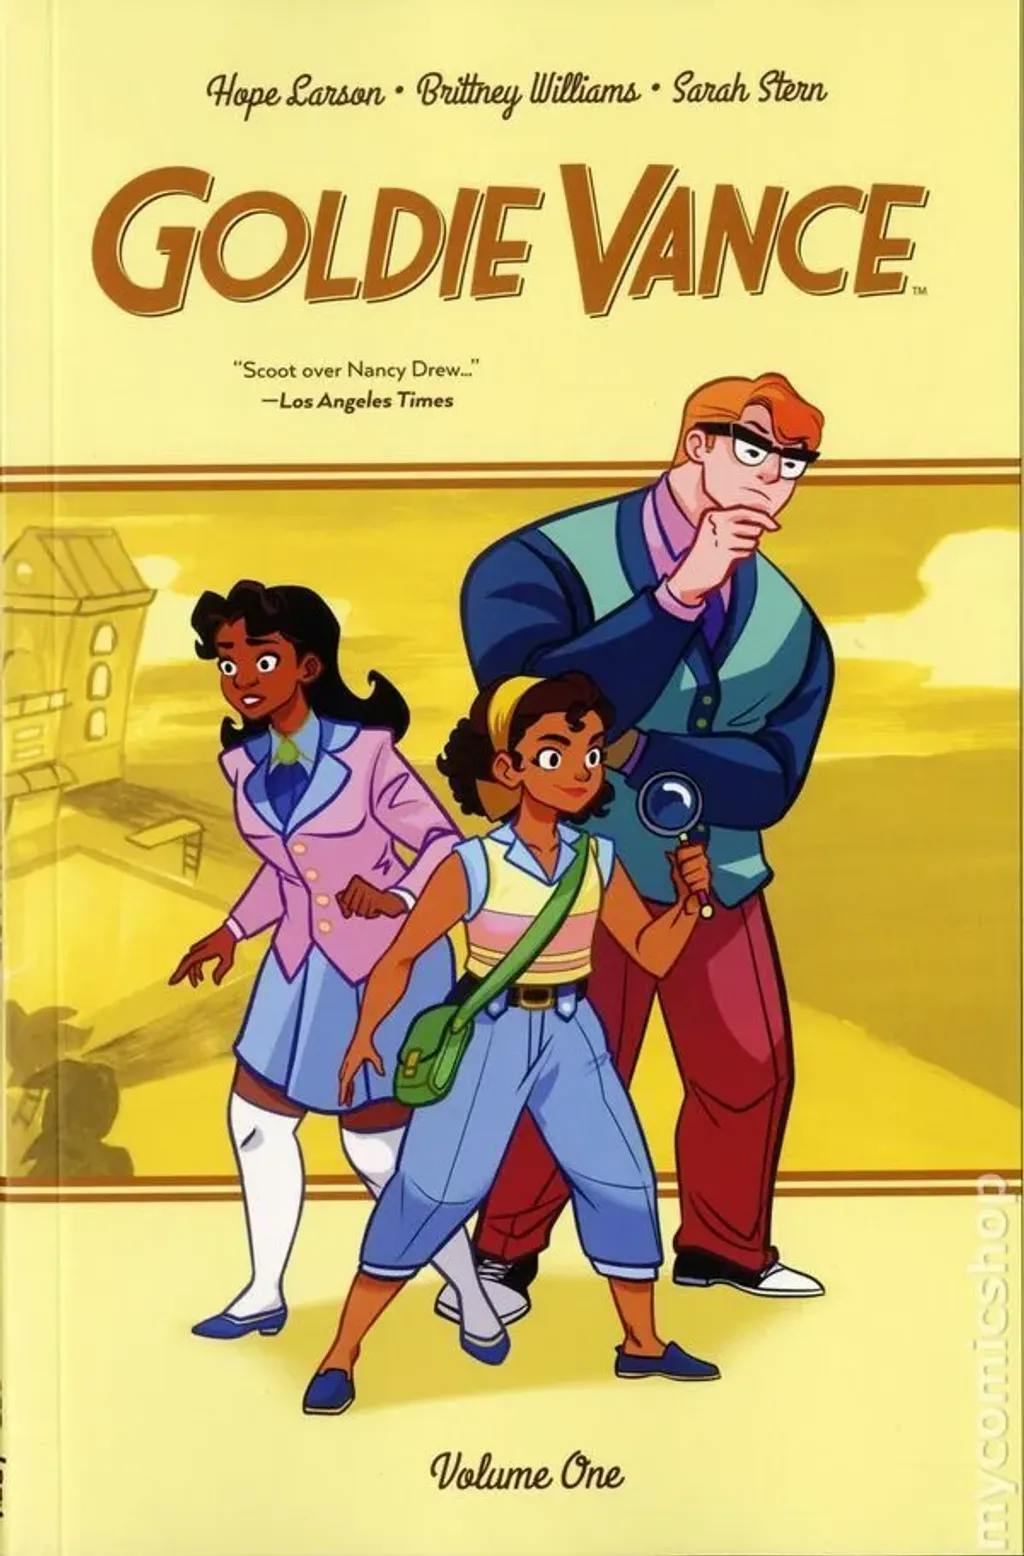 Goldie Vance by Lilliam Rivera and Elle Power